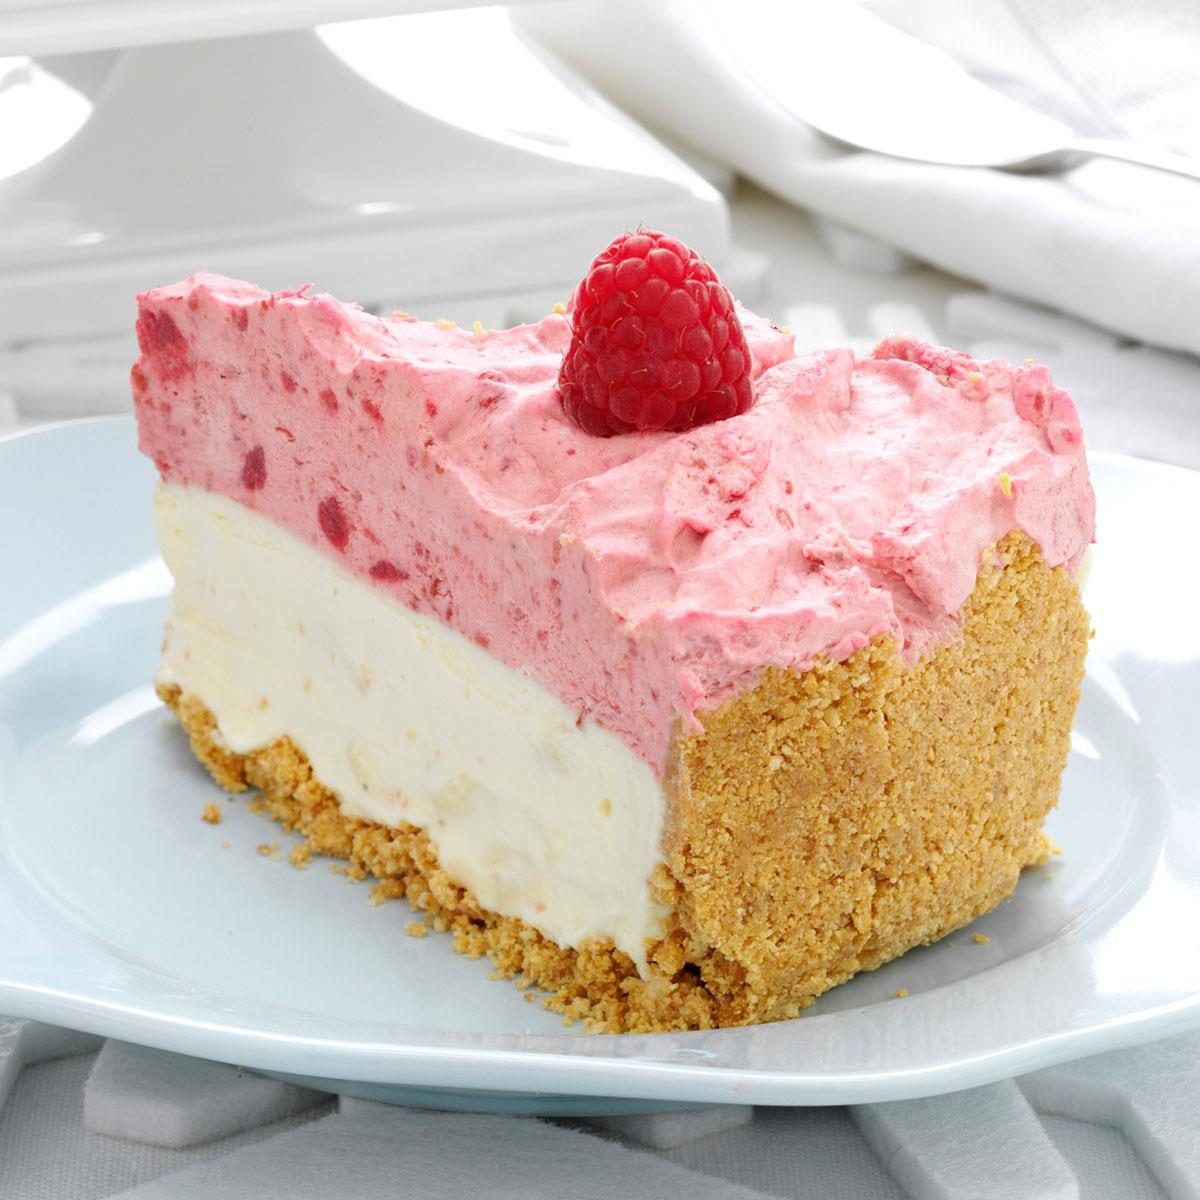 https://www.tasteofhome.com/wp-content/uploads/2018/01/White-Chocolate-Raspberry-Mousse-Cheesecake_exps125883_THCA2449046B01_20_2bC_RMS-4.jpg